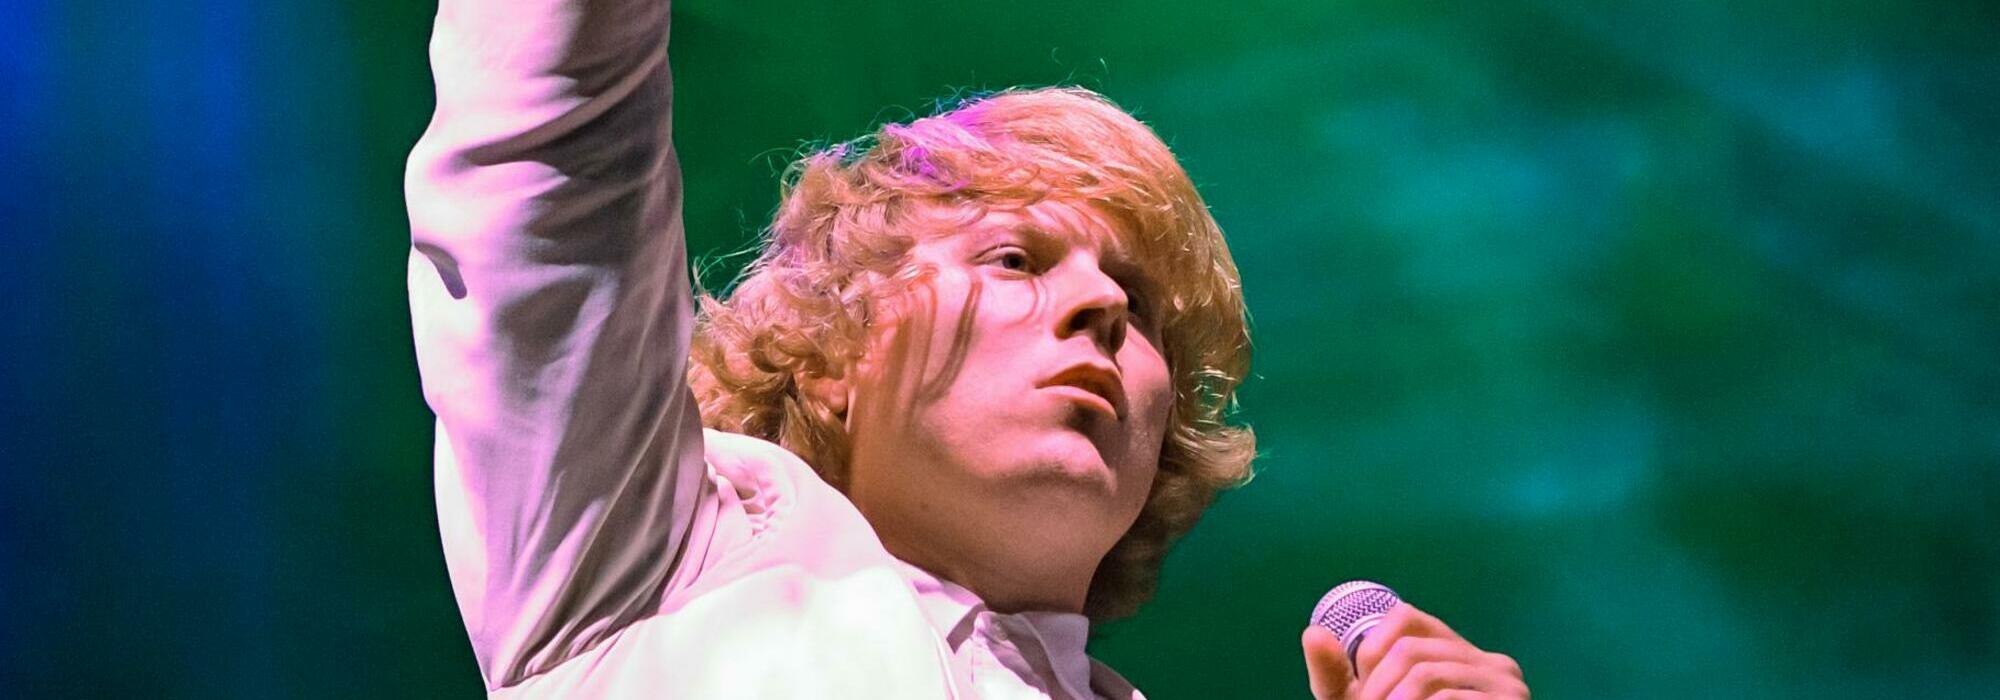 A Ty Segall live event